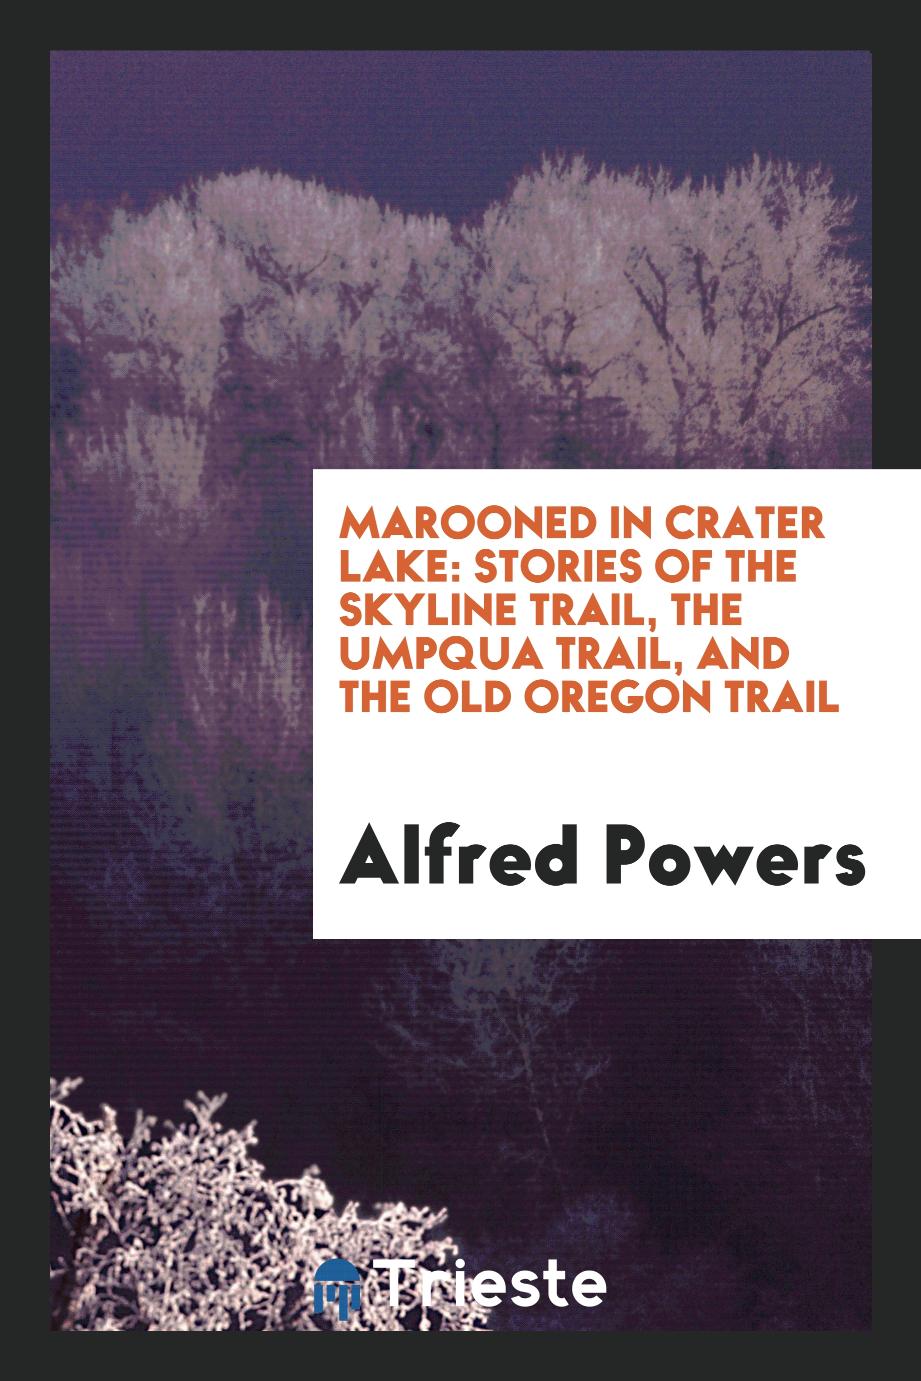 Marooned in Crater Lake: stories of the Skyline Trail, the Umpqua Trail, and the old Oregon Trail